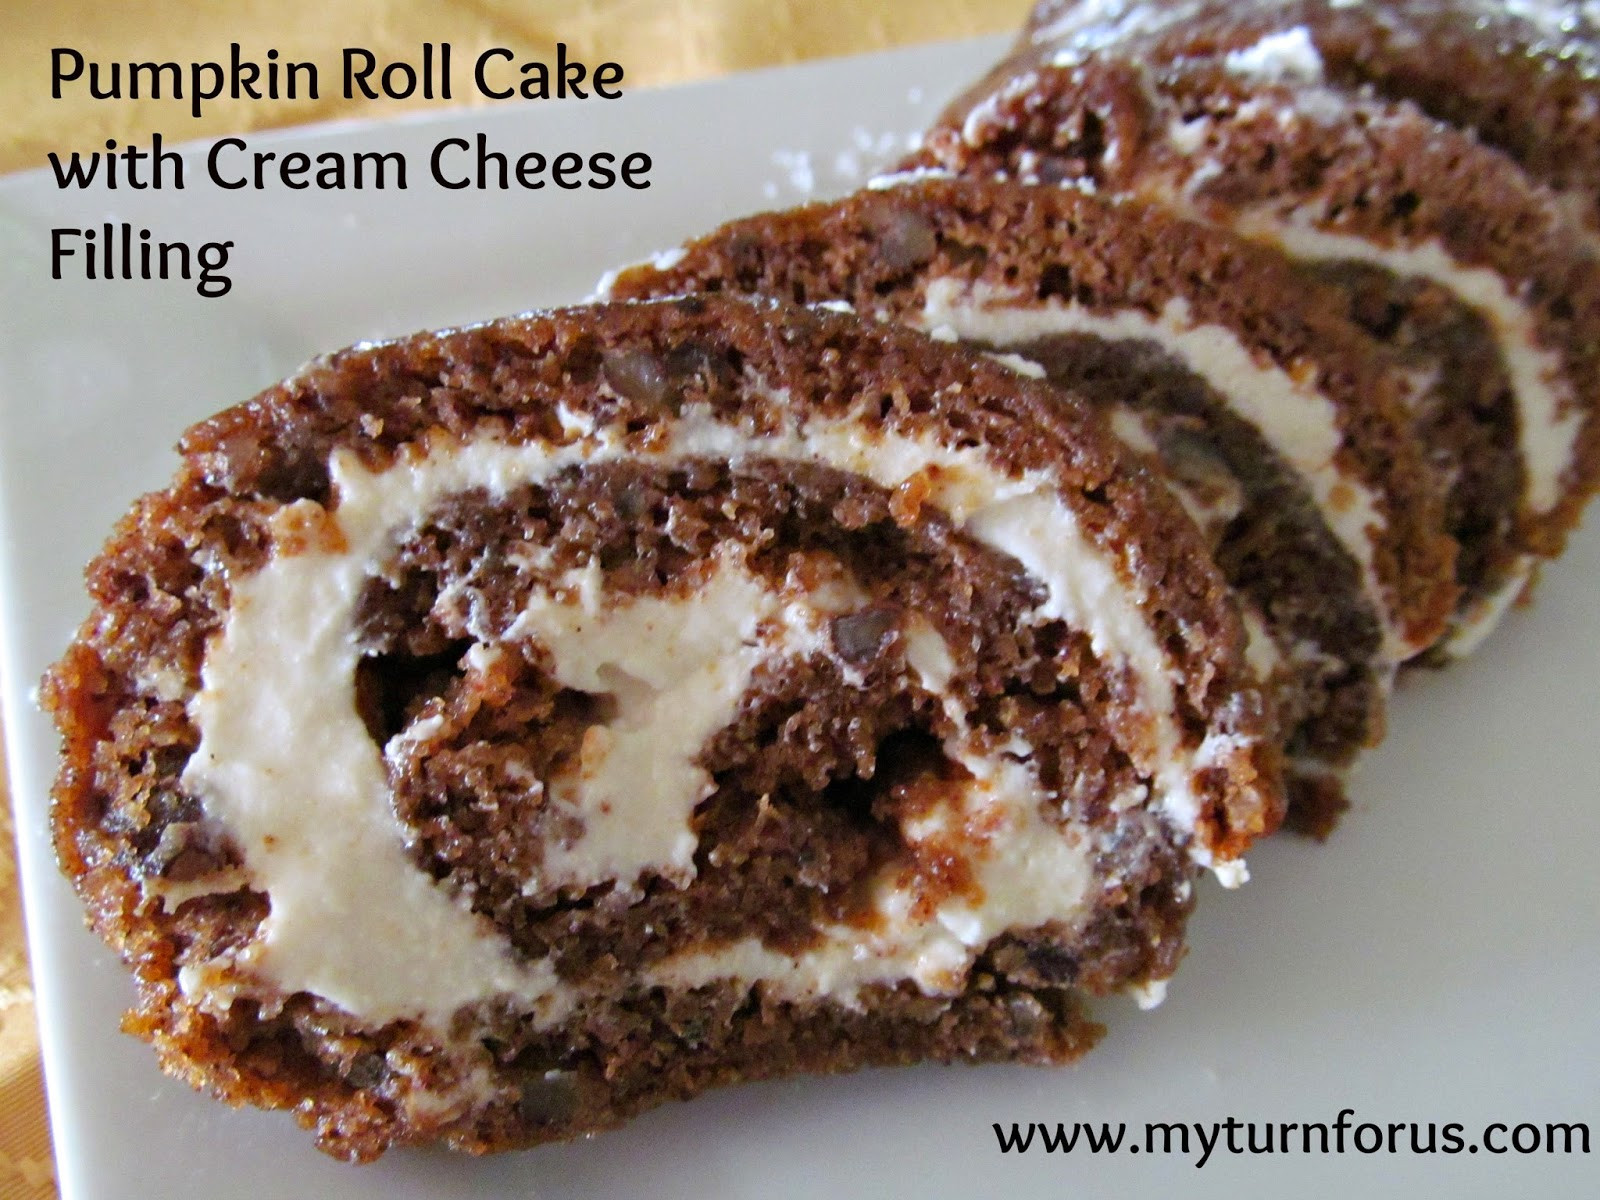 Pumpkin Roll Recipes With Cream Cheese Filling
 Pumpkin Roll Cake With Cream Cheese Filling